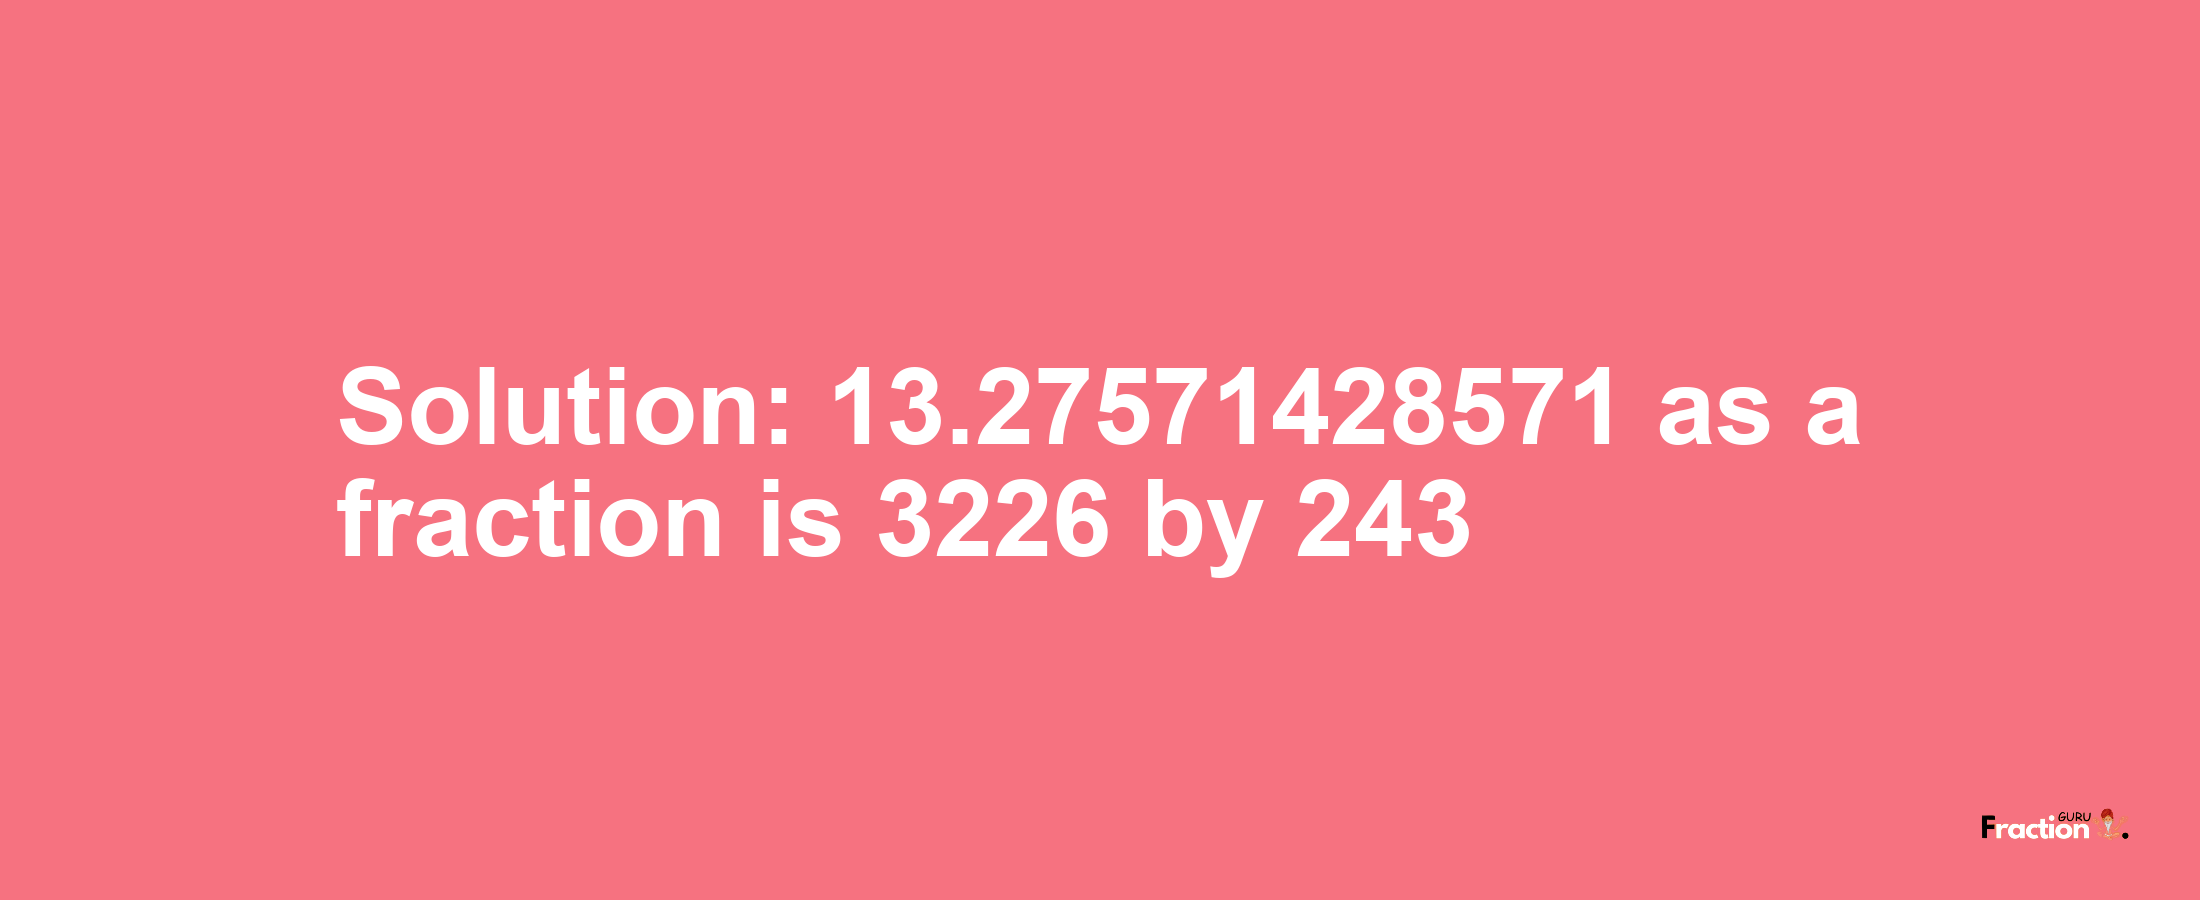 Solution:13.27571428571 as a fraction is 3226/243